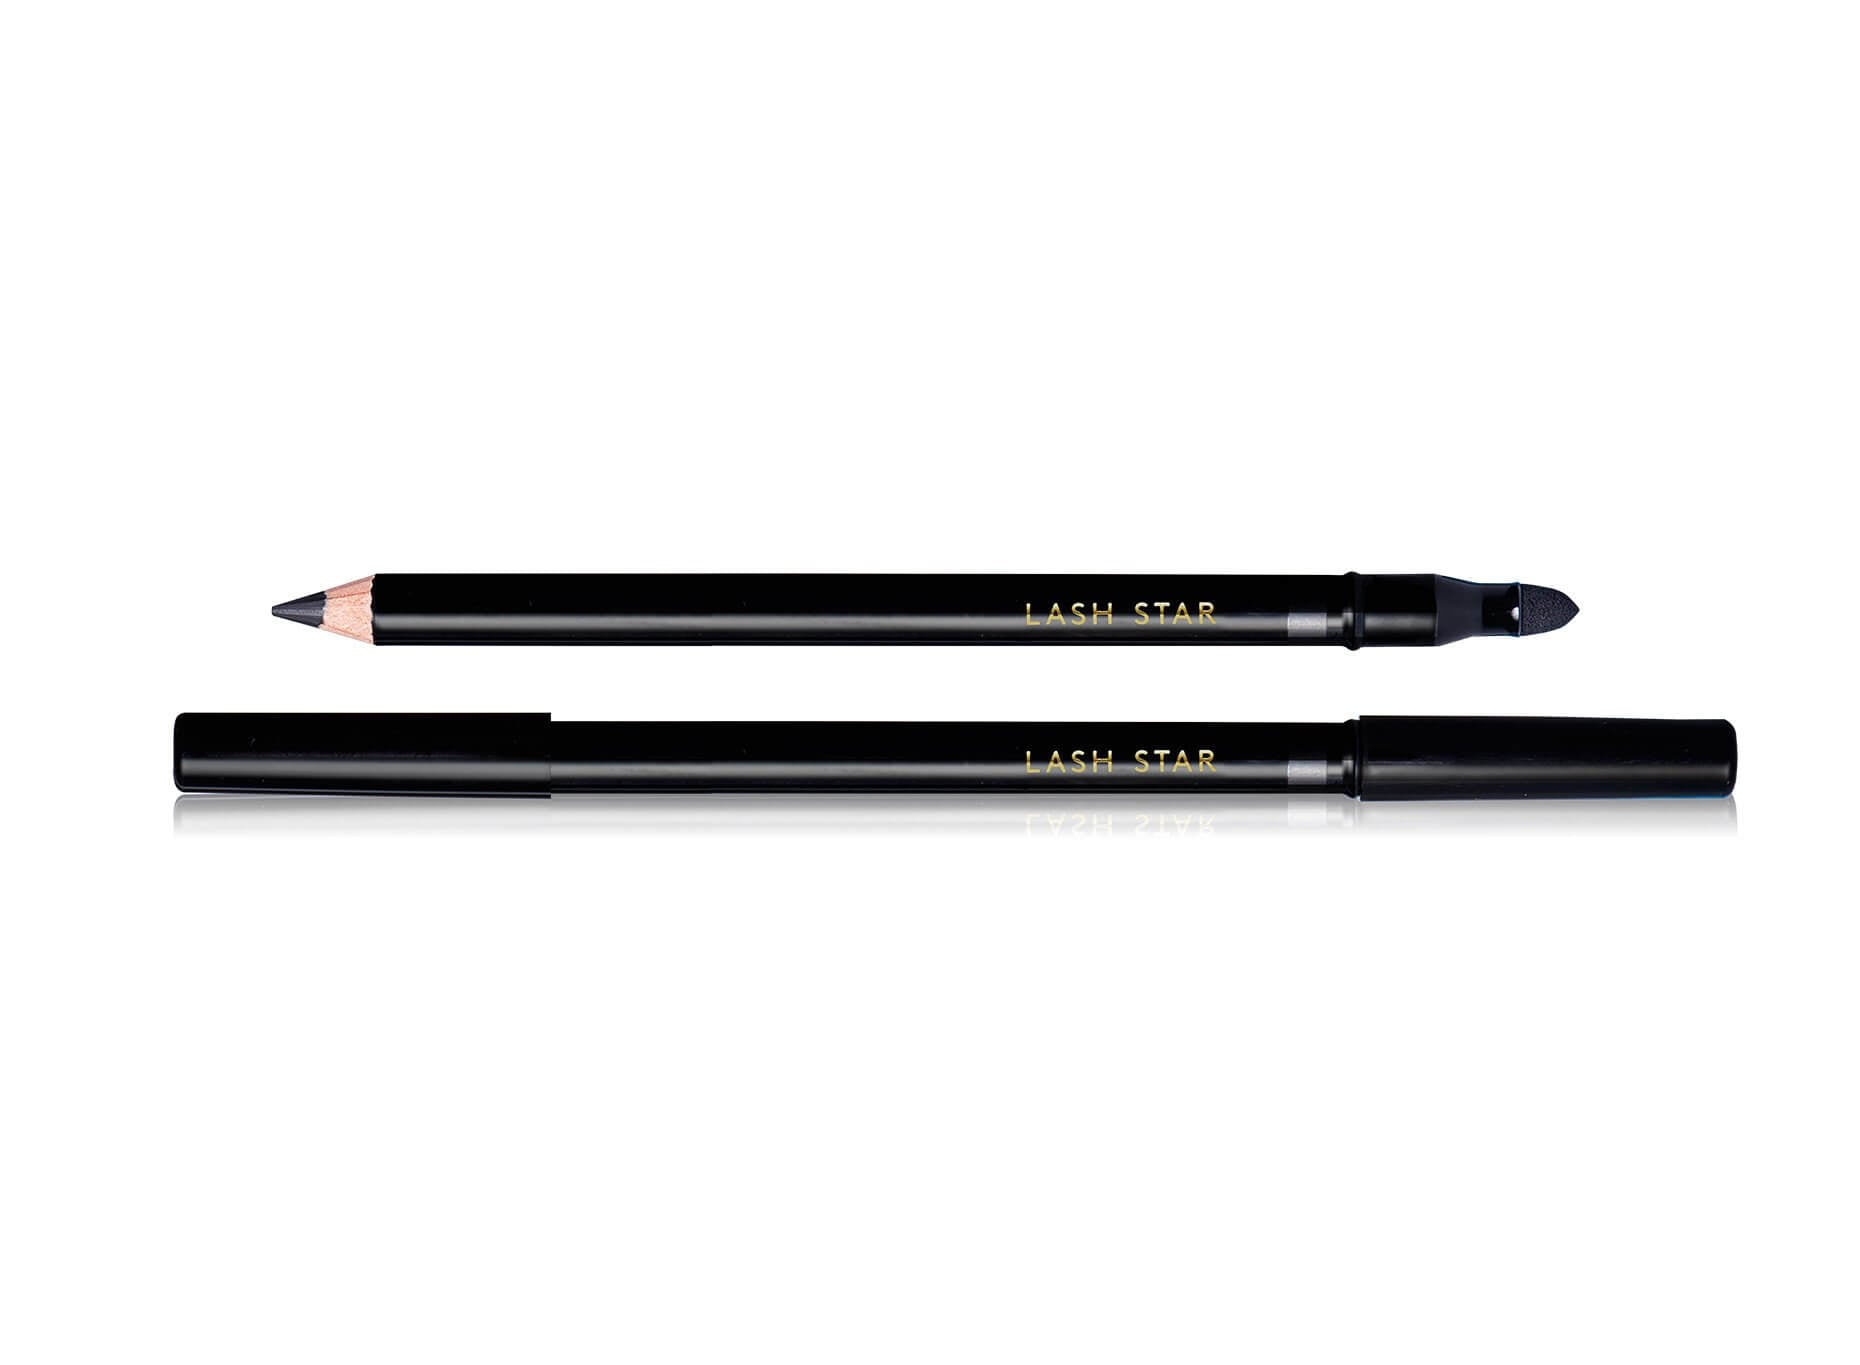 featured-image - kohl eyeliner pencil from Lash Star Beauty